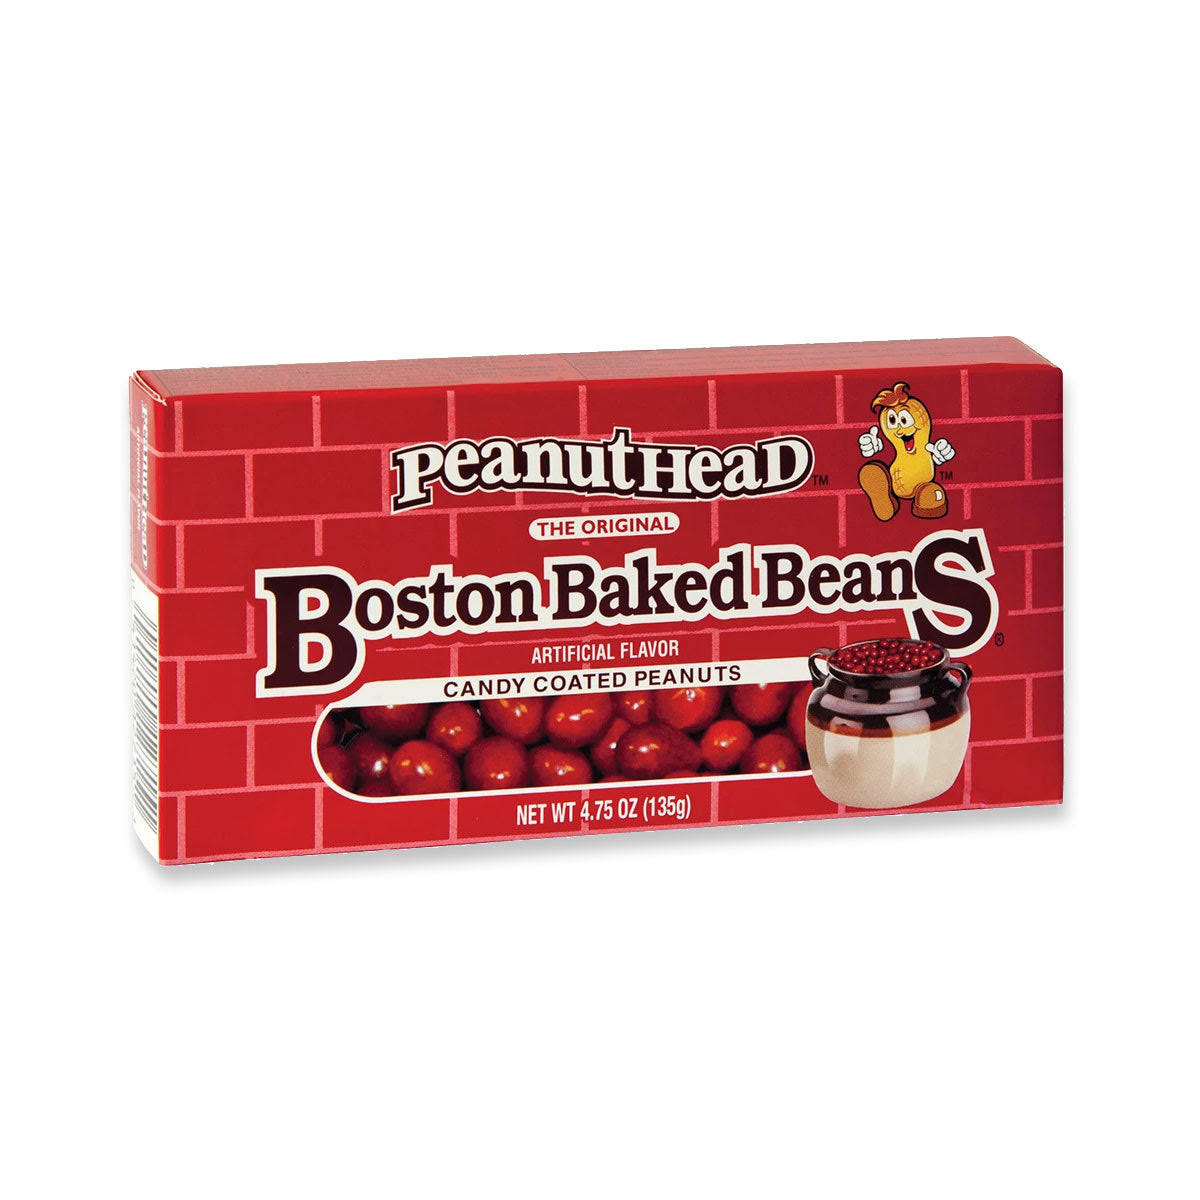 The Original Boston Baked Beans Candy Coated Peanuts - 4.3oz